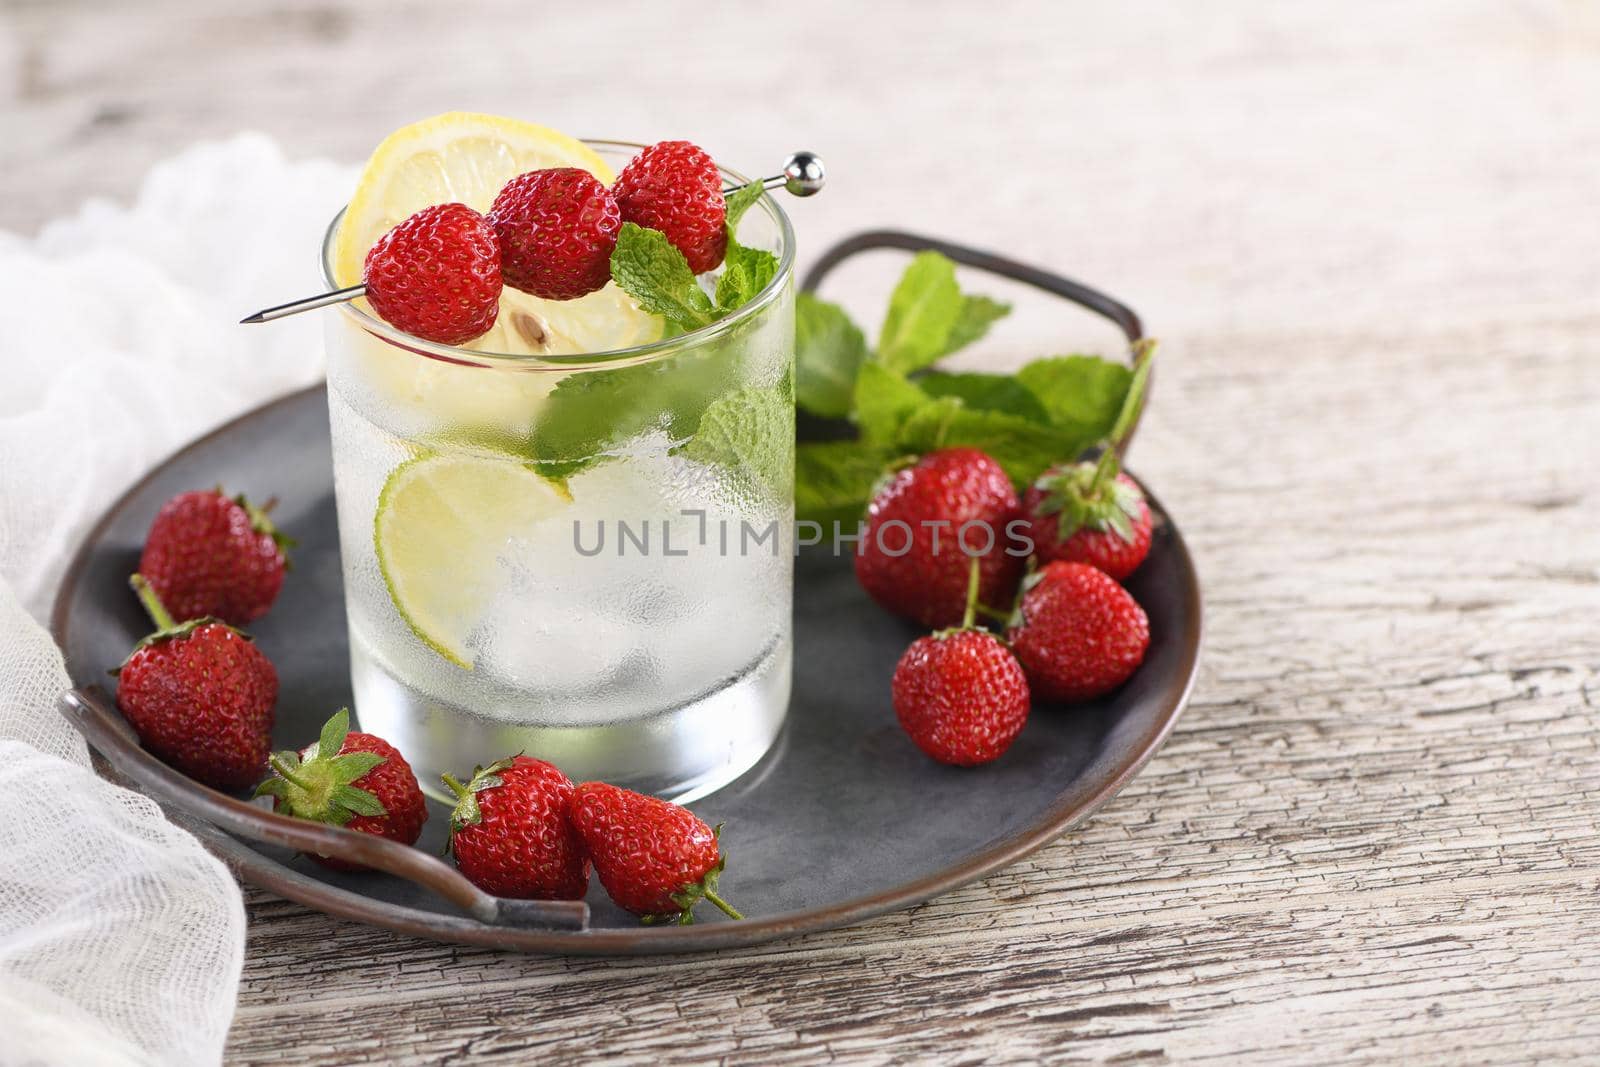 Refreshing organic Mojito cocktail with fresh lime, white rum combined with fresh strawberry and mint. This is the perfect cocktail for summer days.